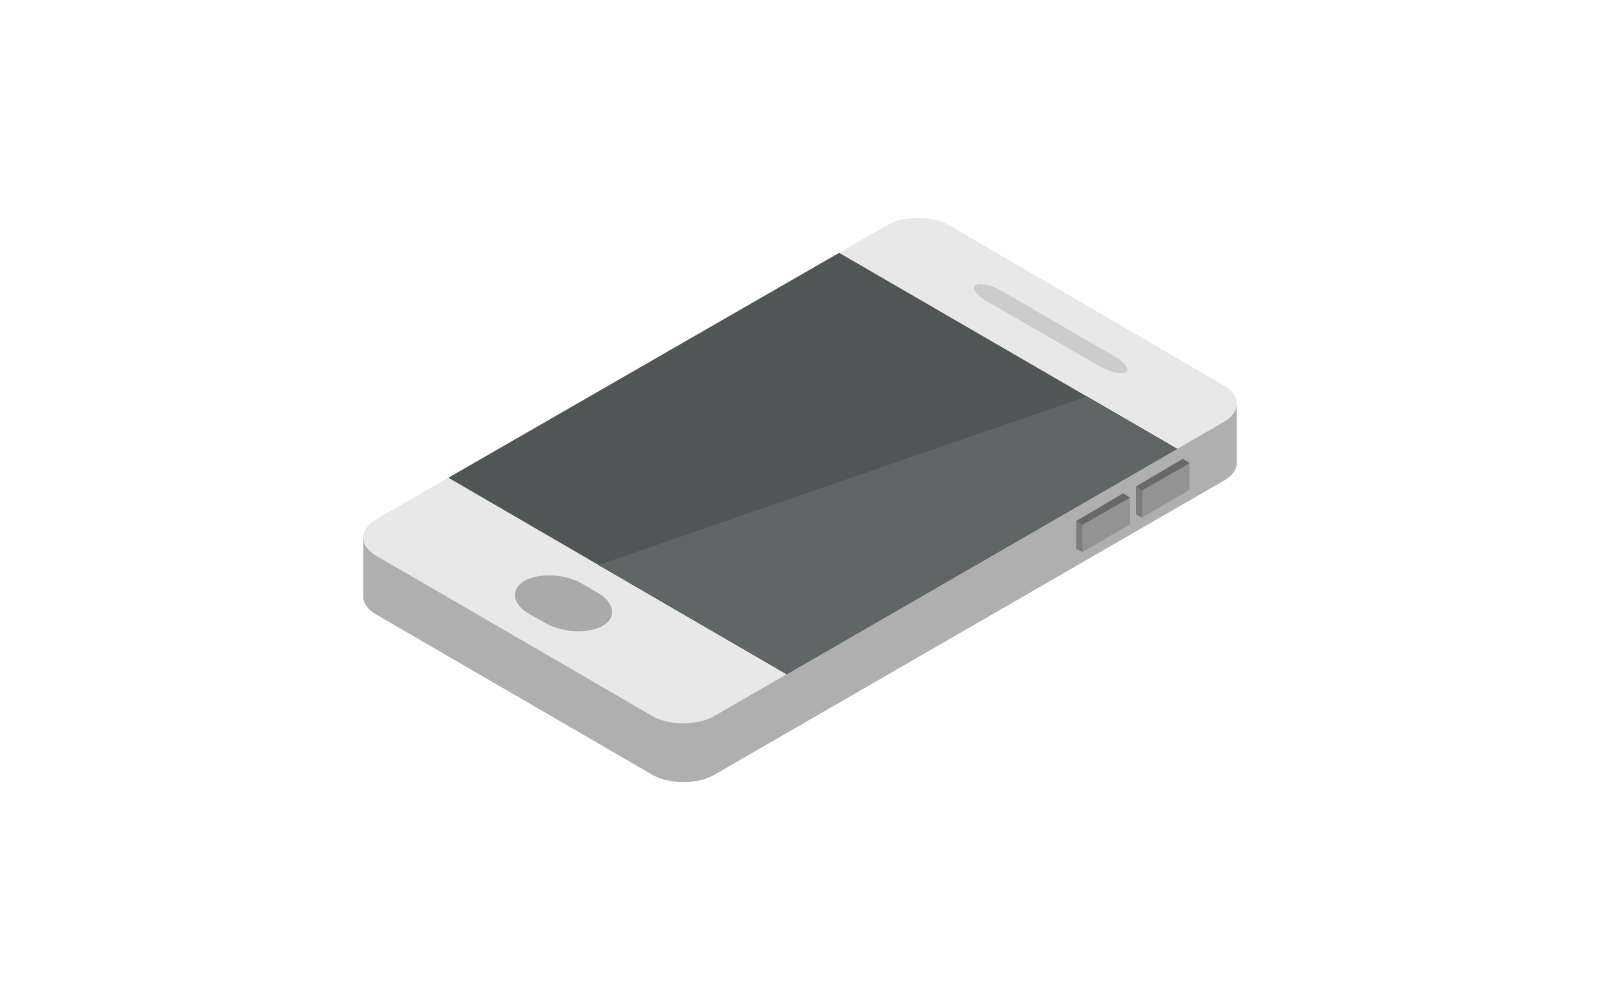 Isometric smartphone illustrated in vector on a white background